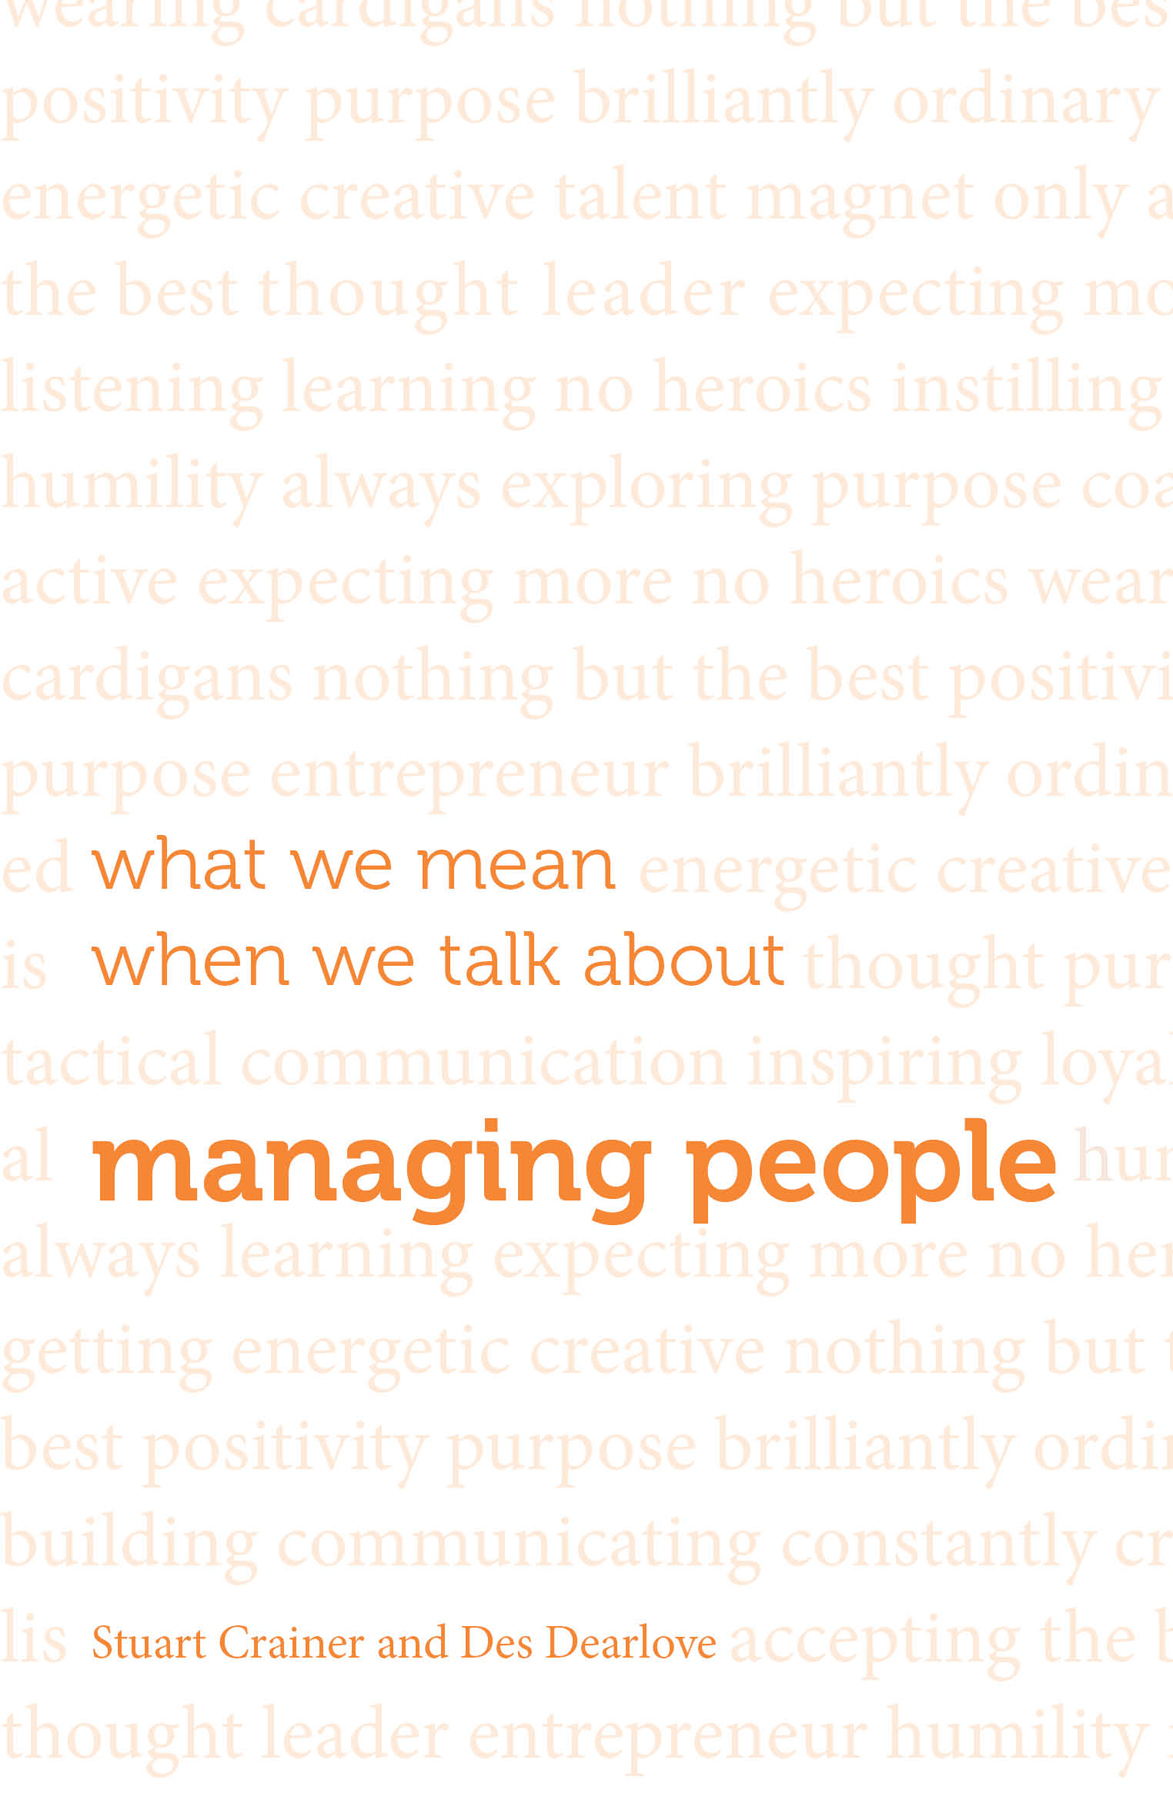 What we mean when we talk about managing people